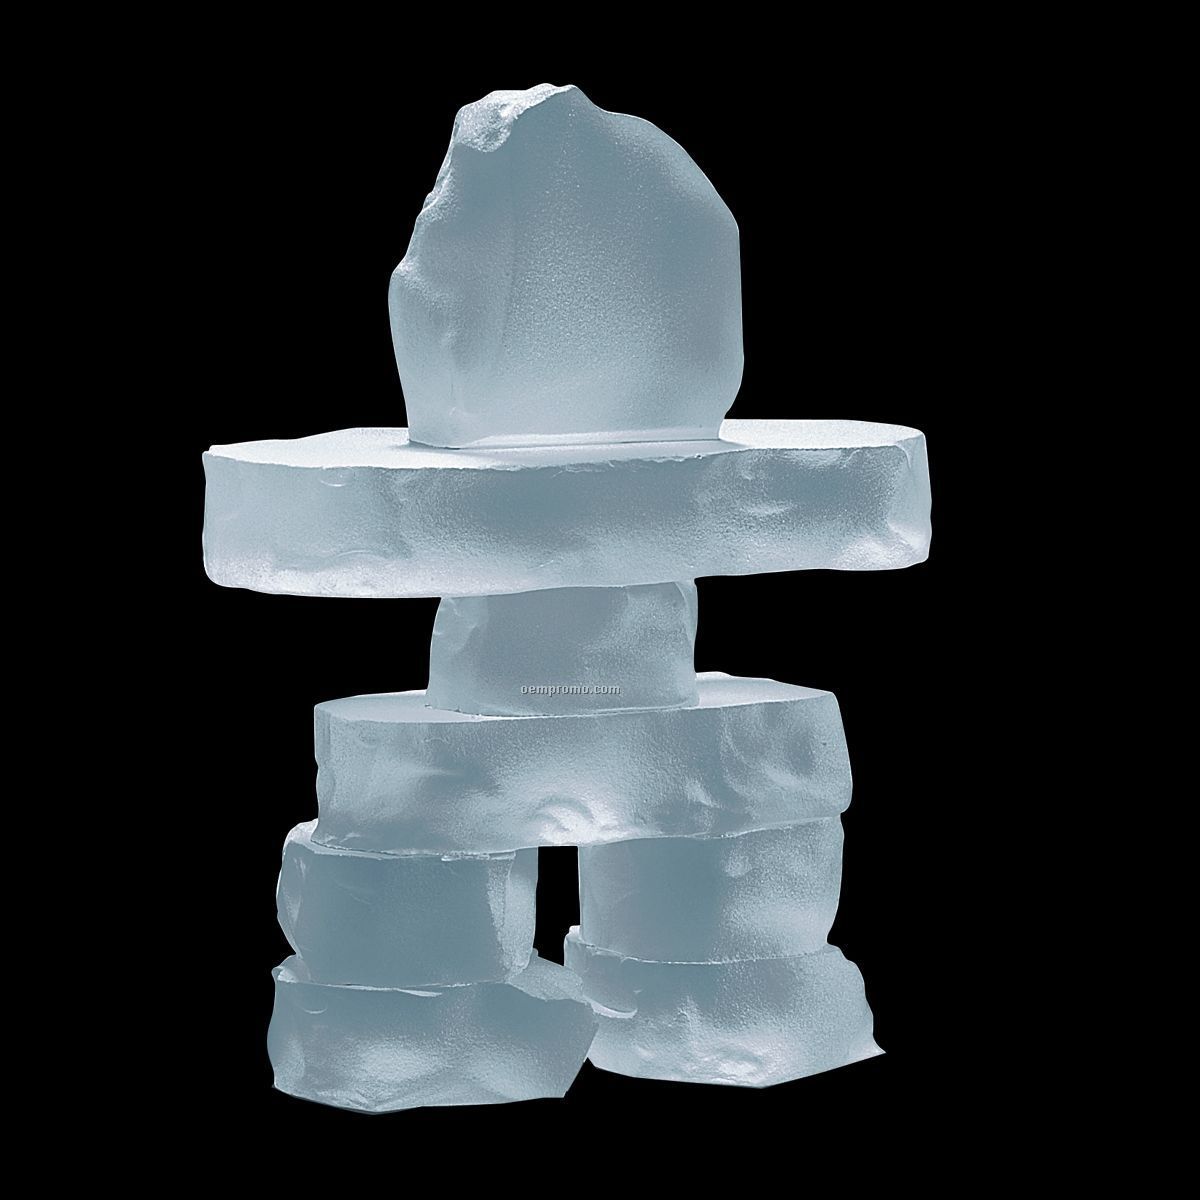 2 1/2" Frosted Inukshuk Sculpture